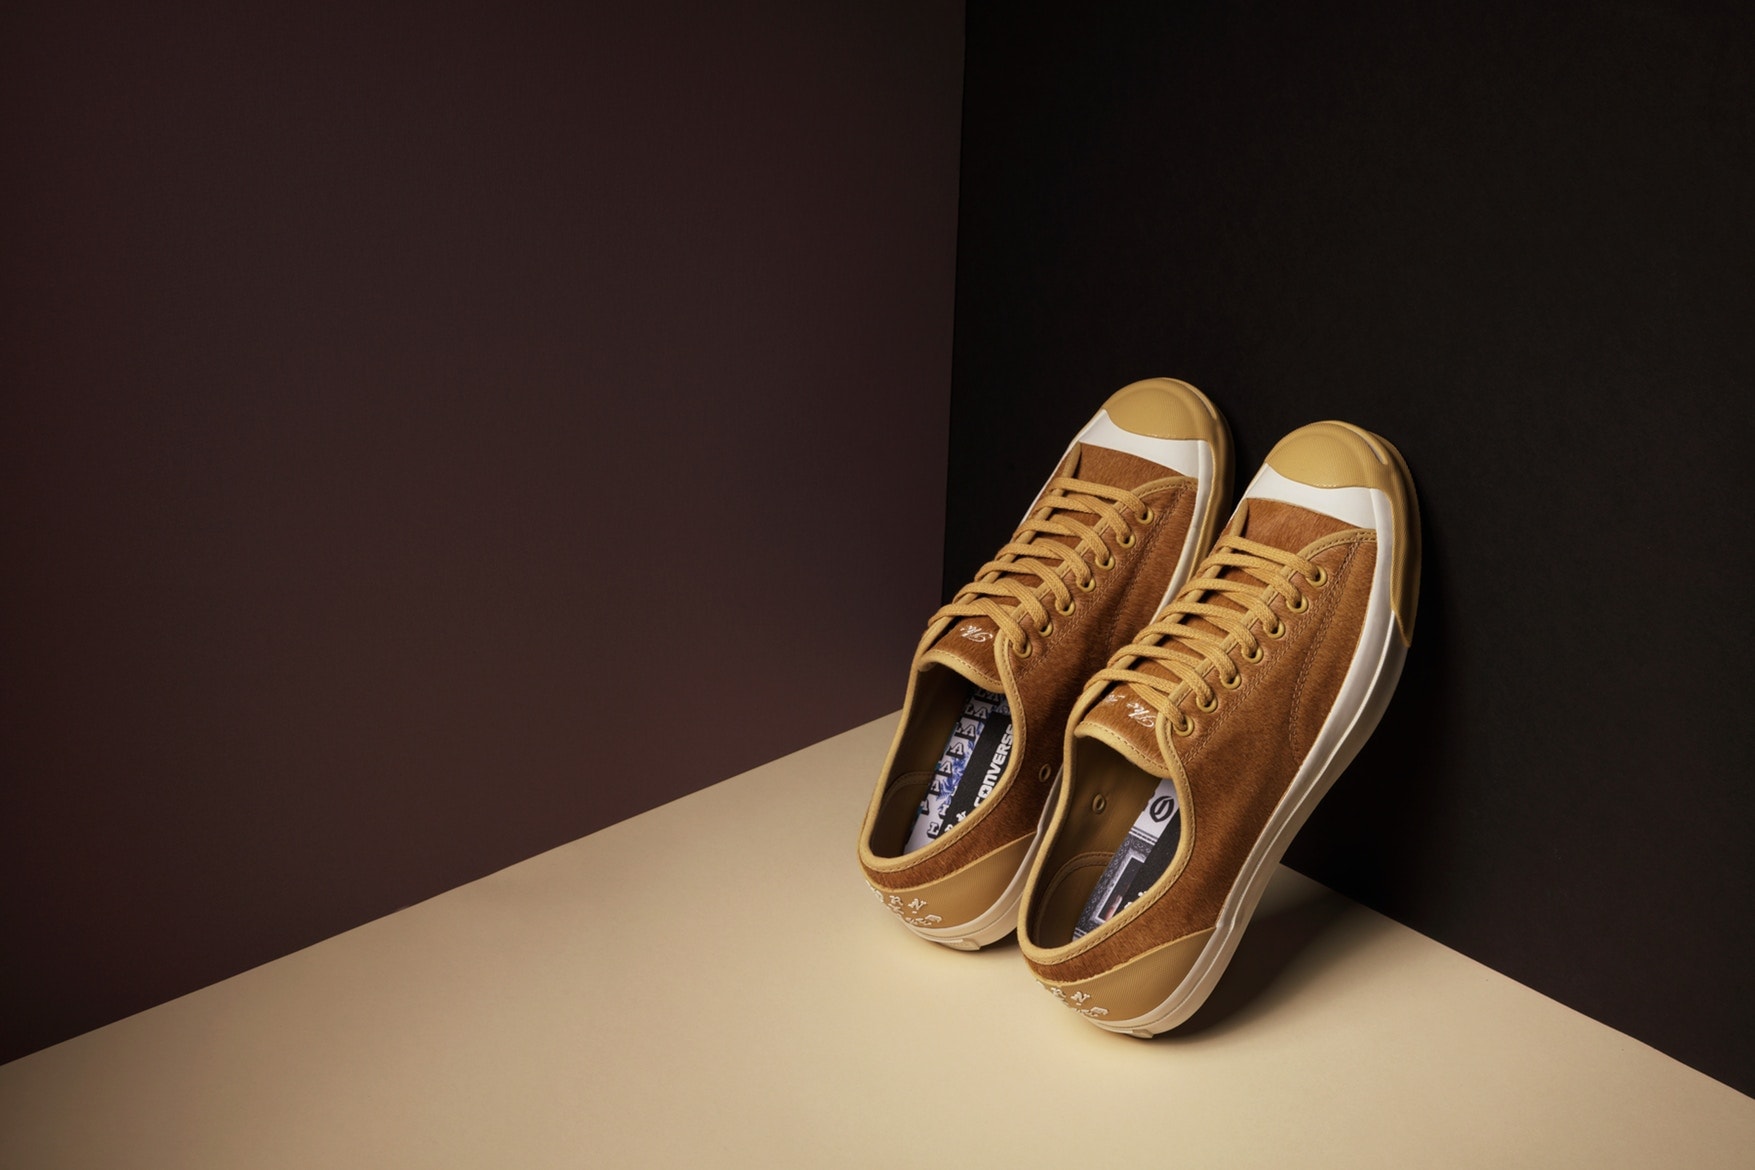 BornxRaised x Converse Jack Purcell「On The Turf」聯名系列